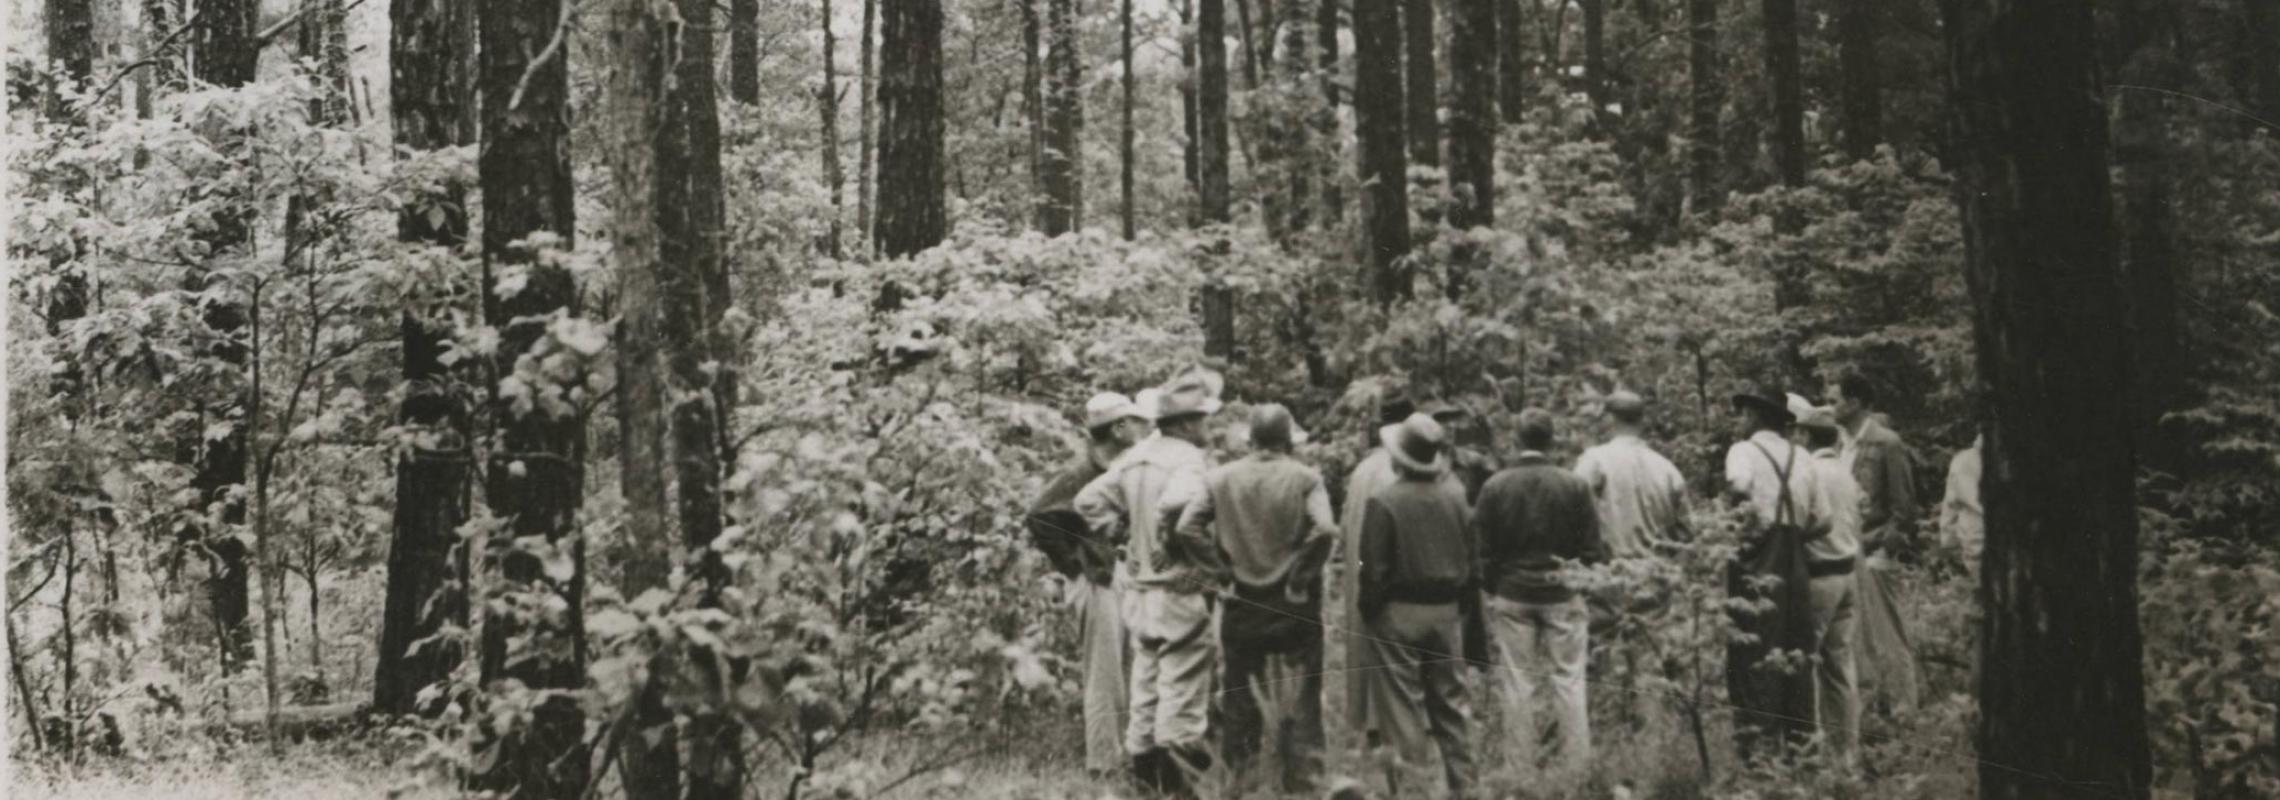 B&W photo of a forest with a group of people below tall trees